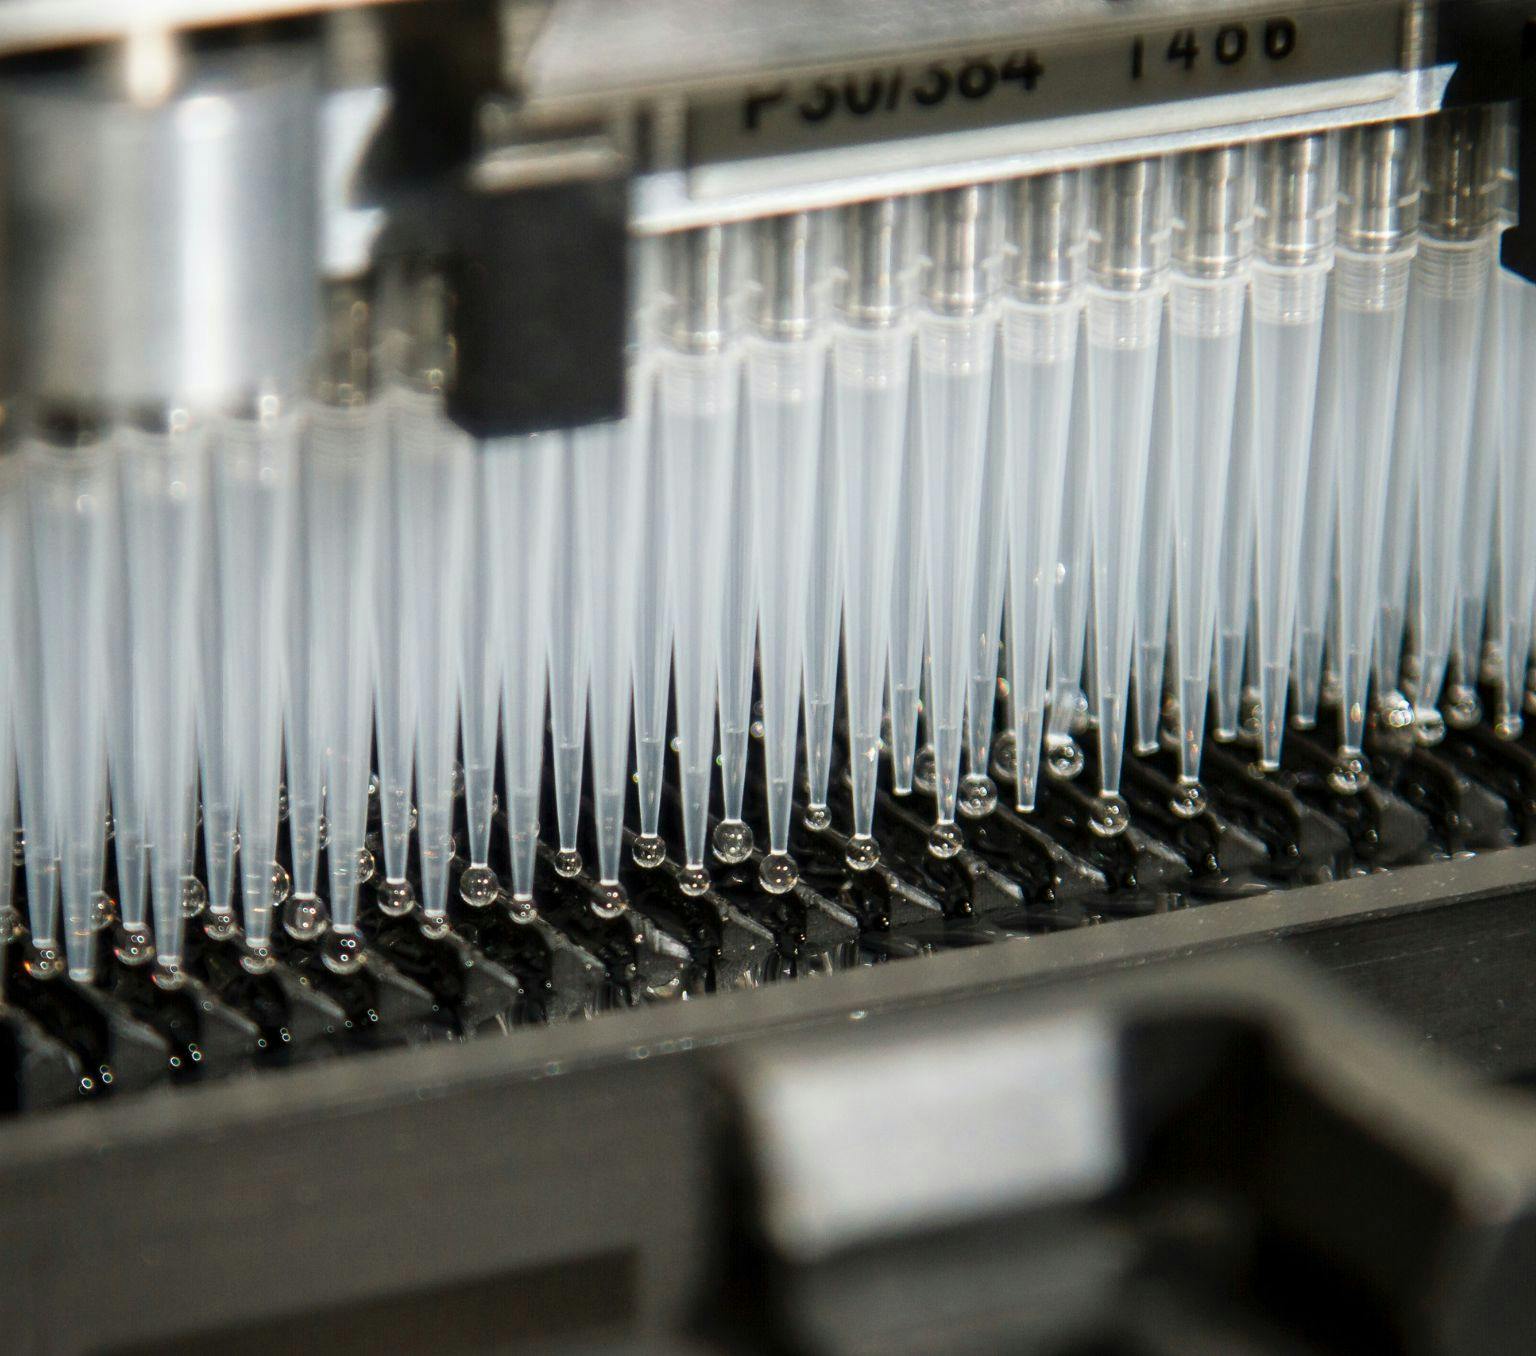 Rows of pipette tubes inside a laboratory.